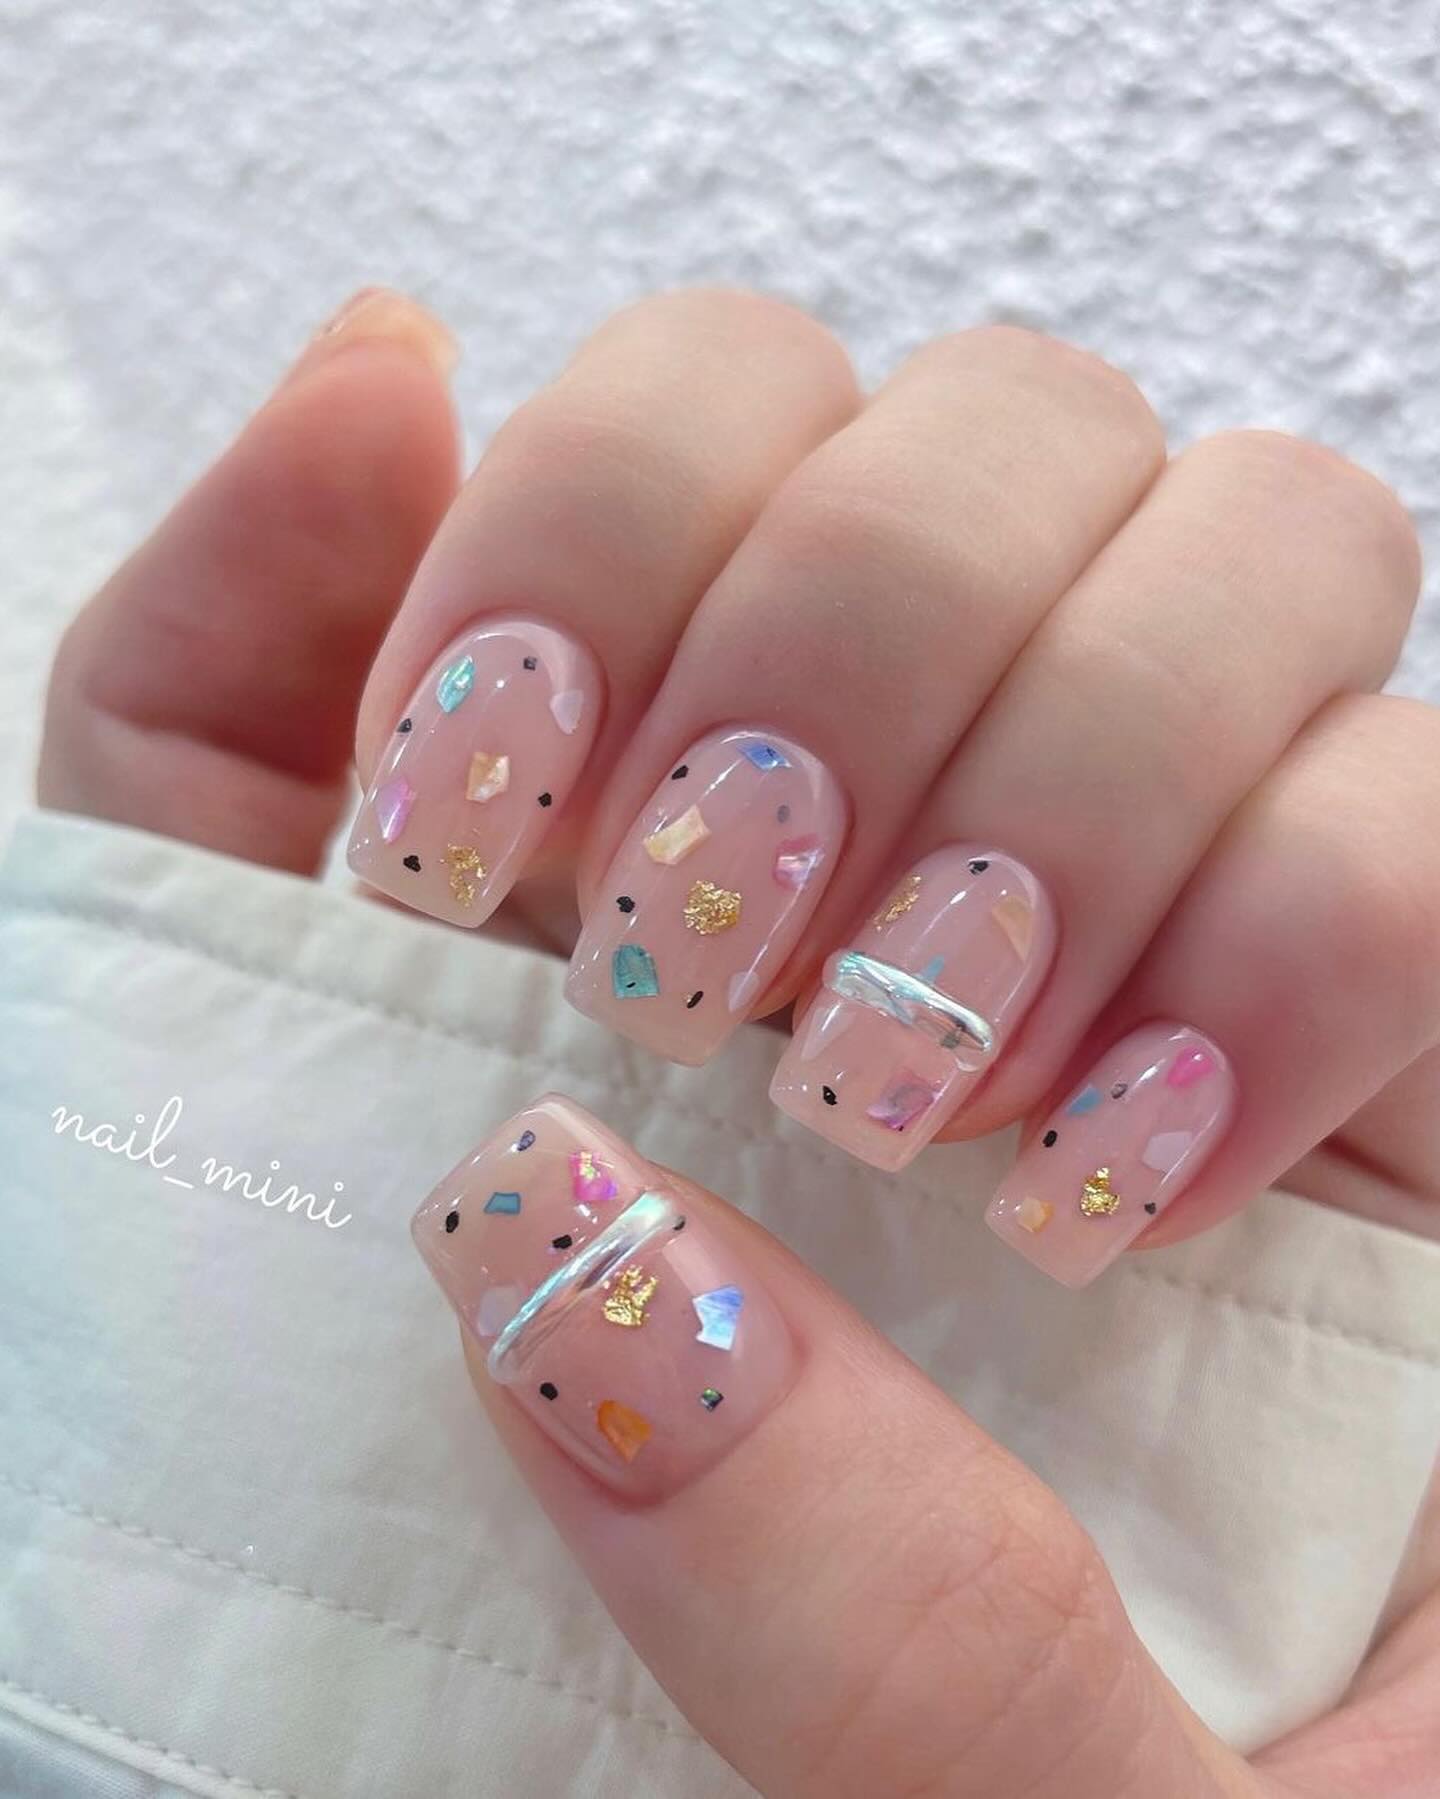 100+ Short Nail Designs You’ll Want To Try This Year images 23